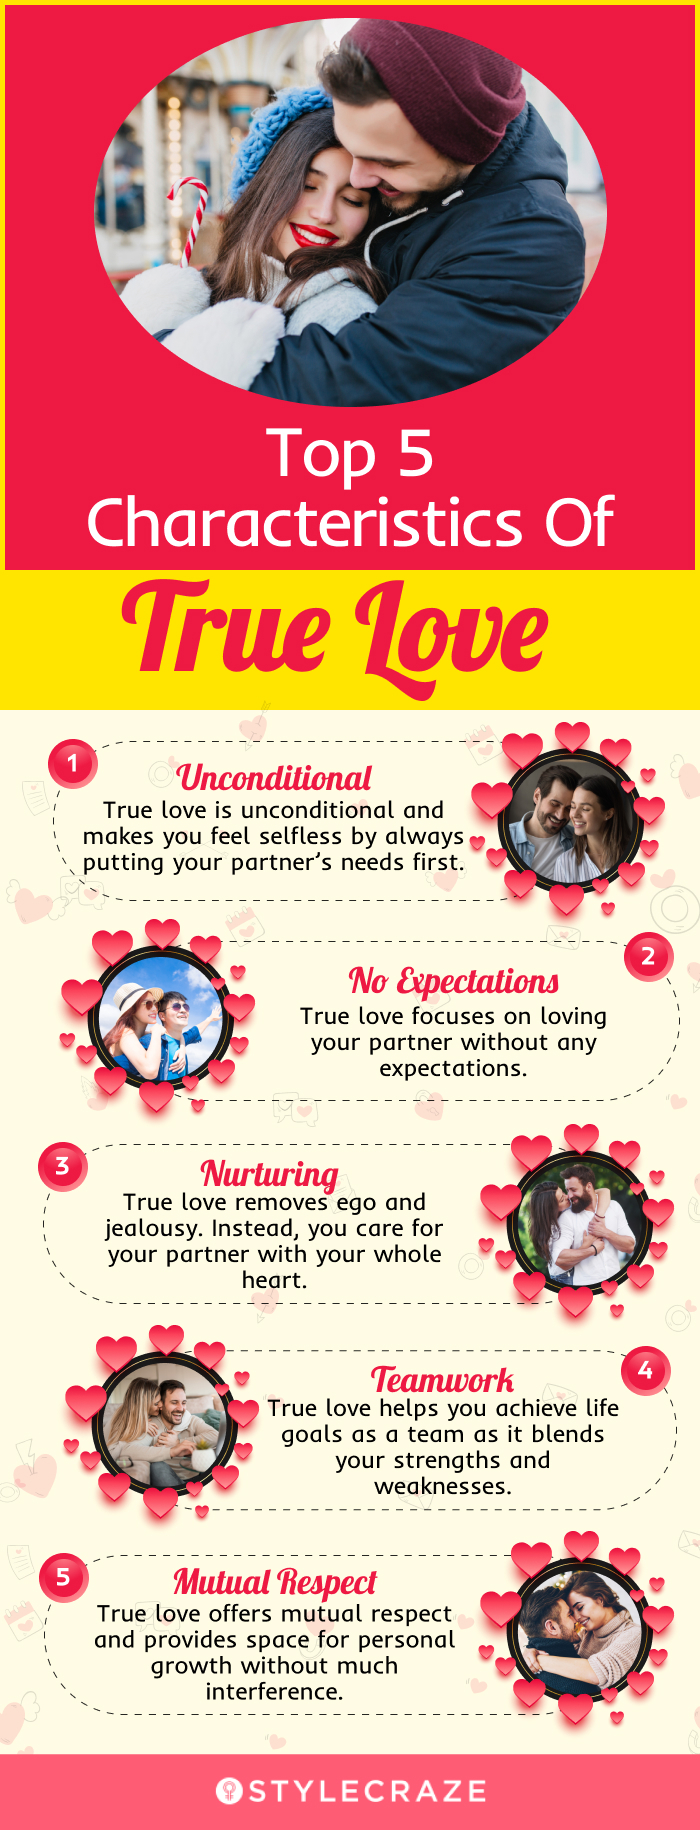 top 5 features of true love to experience for your loved ones (infographic)